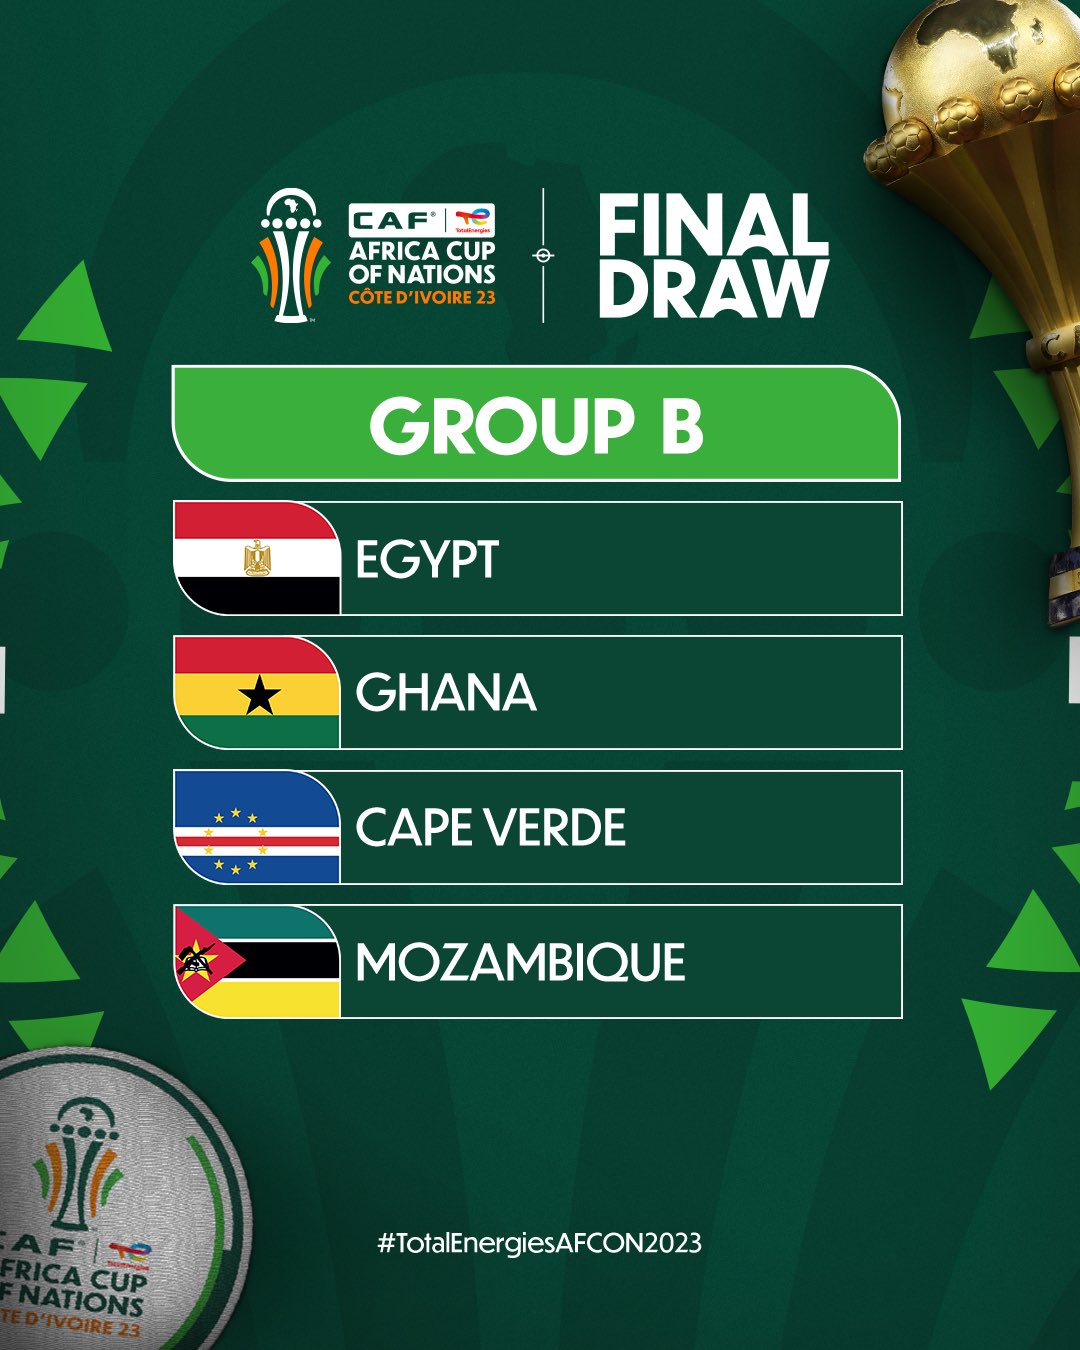 2023 AFCON: Ghana paired with Egypt in Group B